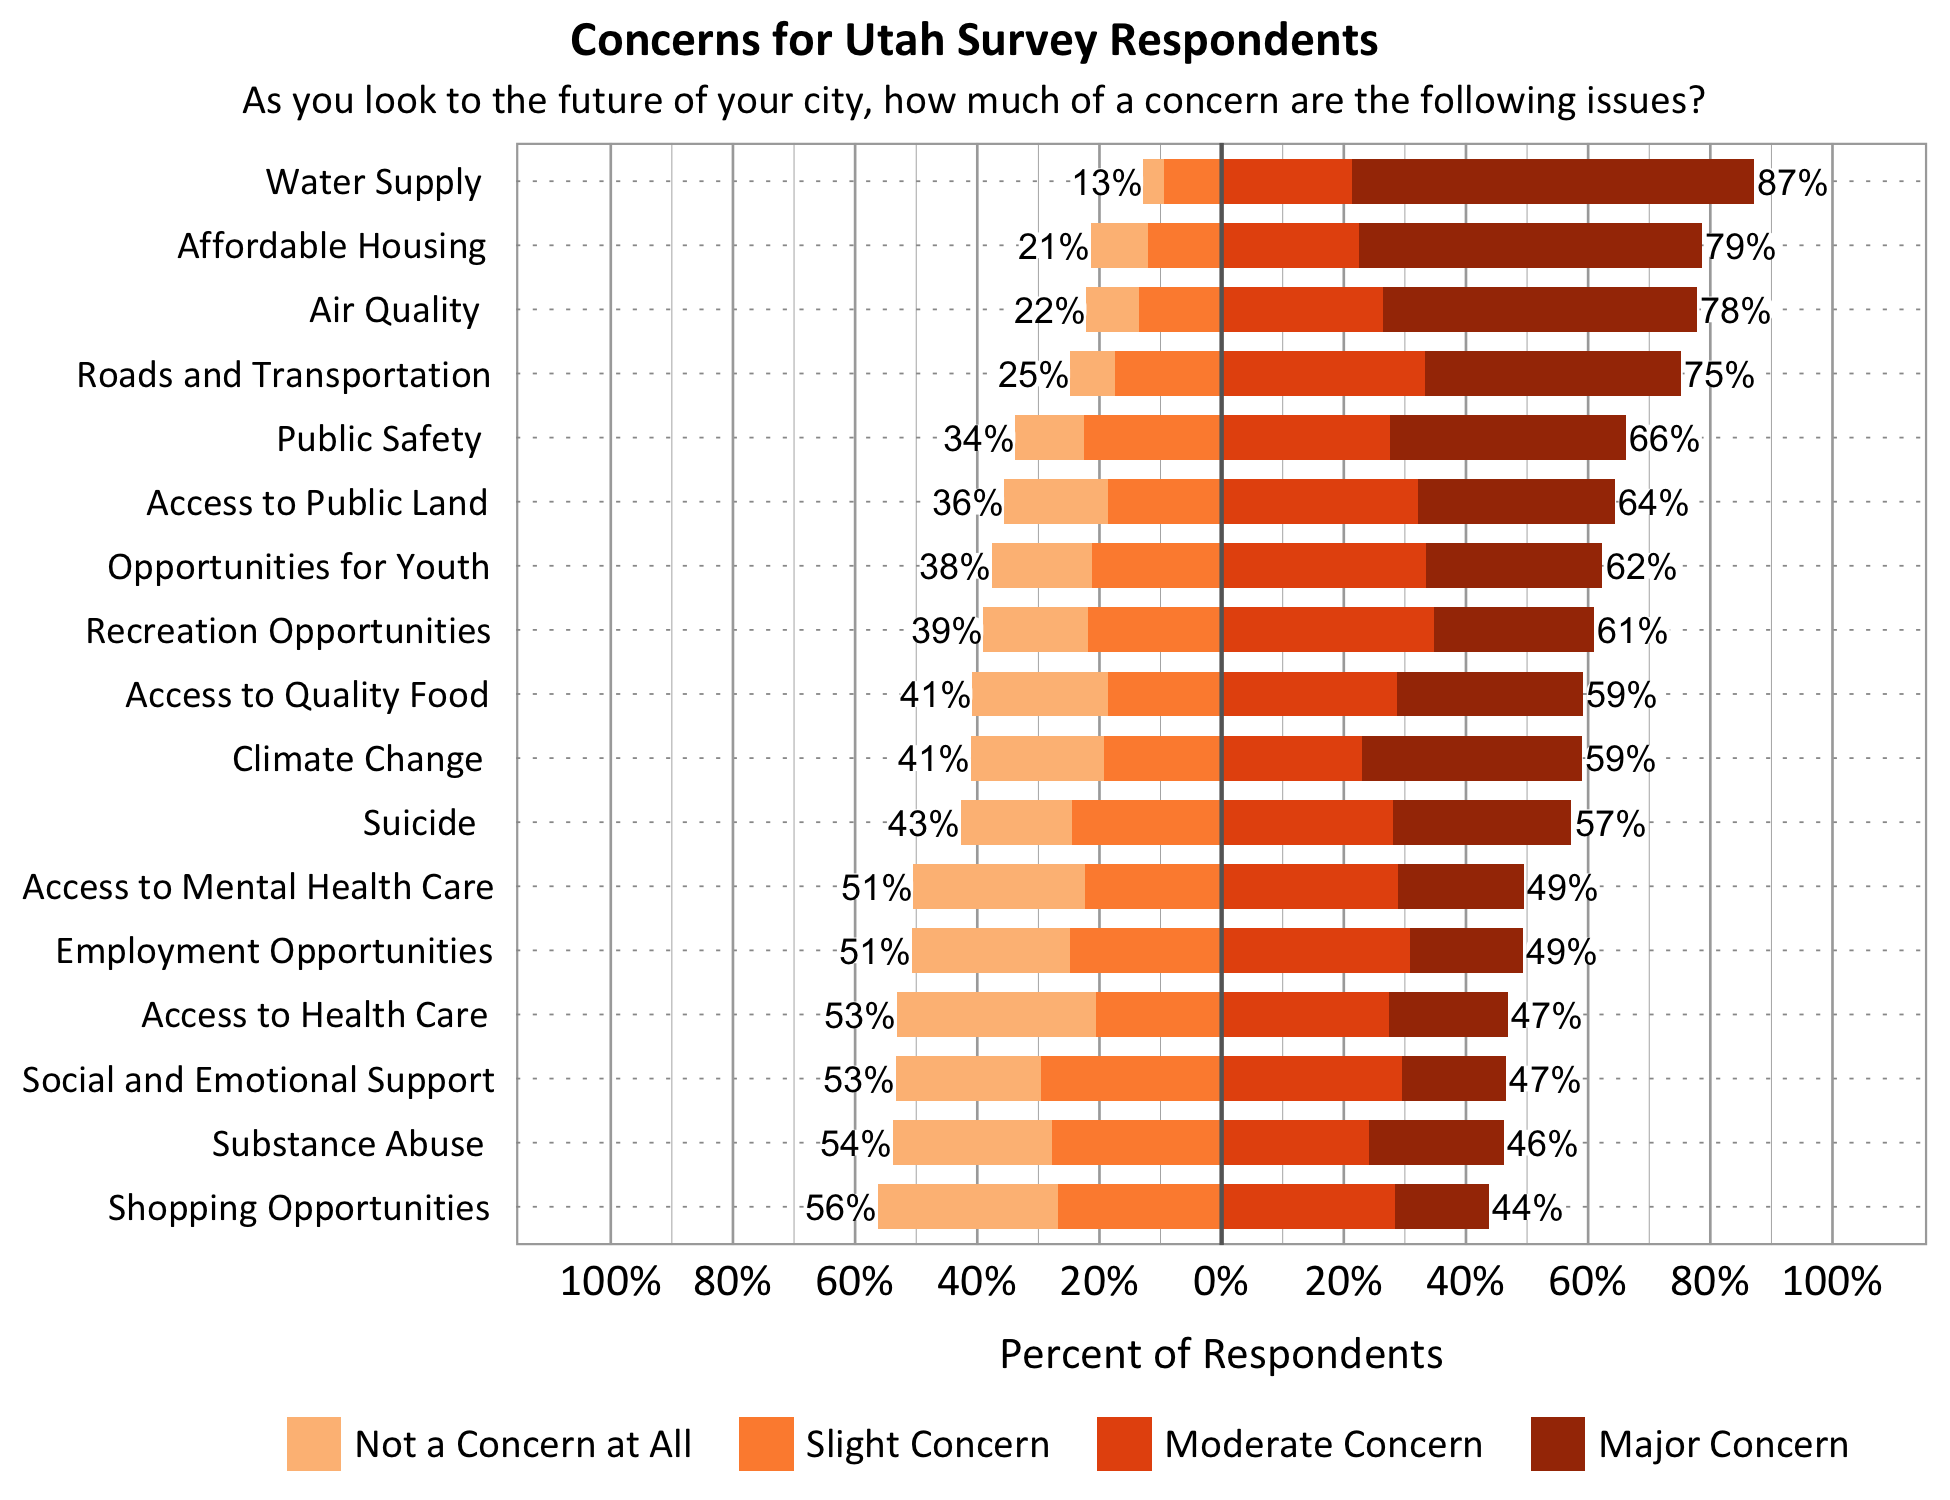 Title: Concerns for Utah Survey Respondents. Subtitle: As you look to the future of your city, how much of a concern are the following issues? Data – Category: Water Supply- 13% of respondents indicated not a concern at all or slight concern while 87% of respondents indicated a moderate or major concern; Category: Opportunities for Youth- 38% of respondents indicated not a concern at all or slight concern while 62% of respondents indicated a moderate or major concern; Category: Affordable Housing- 21% of respondents indicated not a concern at all or slight concern while 79% of respondents indicated a moderate or major concern; Category: Access to Public Lands- 36% of respondents indicated not a concern at all or slight concern while 64% of respondents indicated a moderate or major concern; Category: Employment Opportunities- 51% of respondents indicated not a concern at all or slight concern while 49% of respondents indicated a moderate or major concern; Category: Access to Quality Food- 41% of respondents indicated not a concern at all or slight concern while 59% of respondents indicated a moderate or major concern; Category: Shopping Opportunities- 56% of respondents indicated not a concern at all or slight concern while 44% of respondents indicated a moderate or major concern; Category: Recreation Opportunities- 39% of respondents indicated not a concern at all or slight concern while 61% of respondents indicated a moderate or major concern; Category: Substance Abuse- 54% of respondents indicated not a concern at all or slight concern while 46% of respondents indicated a moderate or major concern; Category: Roads and Transportation- 25% of respondents indicated not a concern at all or slight concern while 75% of respondents indicated a moderate or major concern; Category: Social and Emotional Support- 53% of respondents indicated not a concern at all or slight concern while 47% of respondents indicated a moderate or major concern; Category: Access to Health Care- 53% of respondents indicated not a concern at all or slight concern while 47% of respondents indicated a moderate or major concern; Category: Public Safety- 34% of respondents indicated not a concern at all or slight concern while 66% of respondents indicated a moderate or major concern; Category: Access to Mental Health Care - 51% of respondents indicated not a concern at all or slight concern while 49% of respondents indicated a moderate or major concern; Category: Air Quality- 22% of respondents indicated not a concern at all or slight concern while 78% of respondents indicated a moderate or major concern. Climate Change- 41% of respondents indicated not a concern at all or slight concern while 59% of respondents indicated a moderate or major concern.